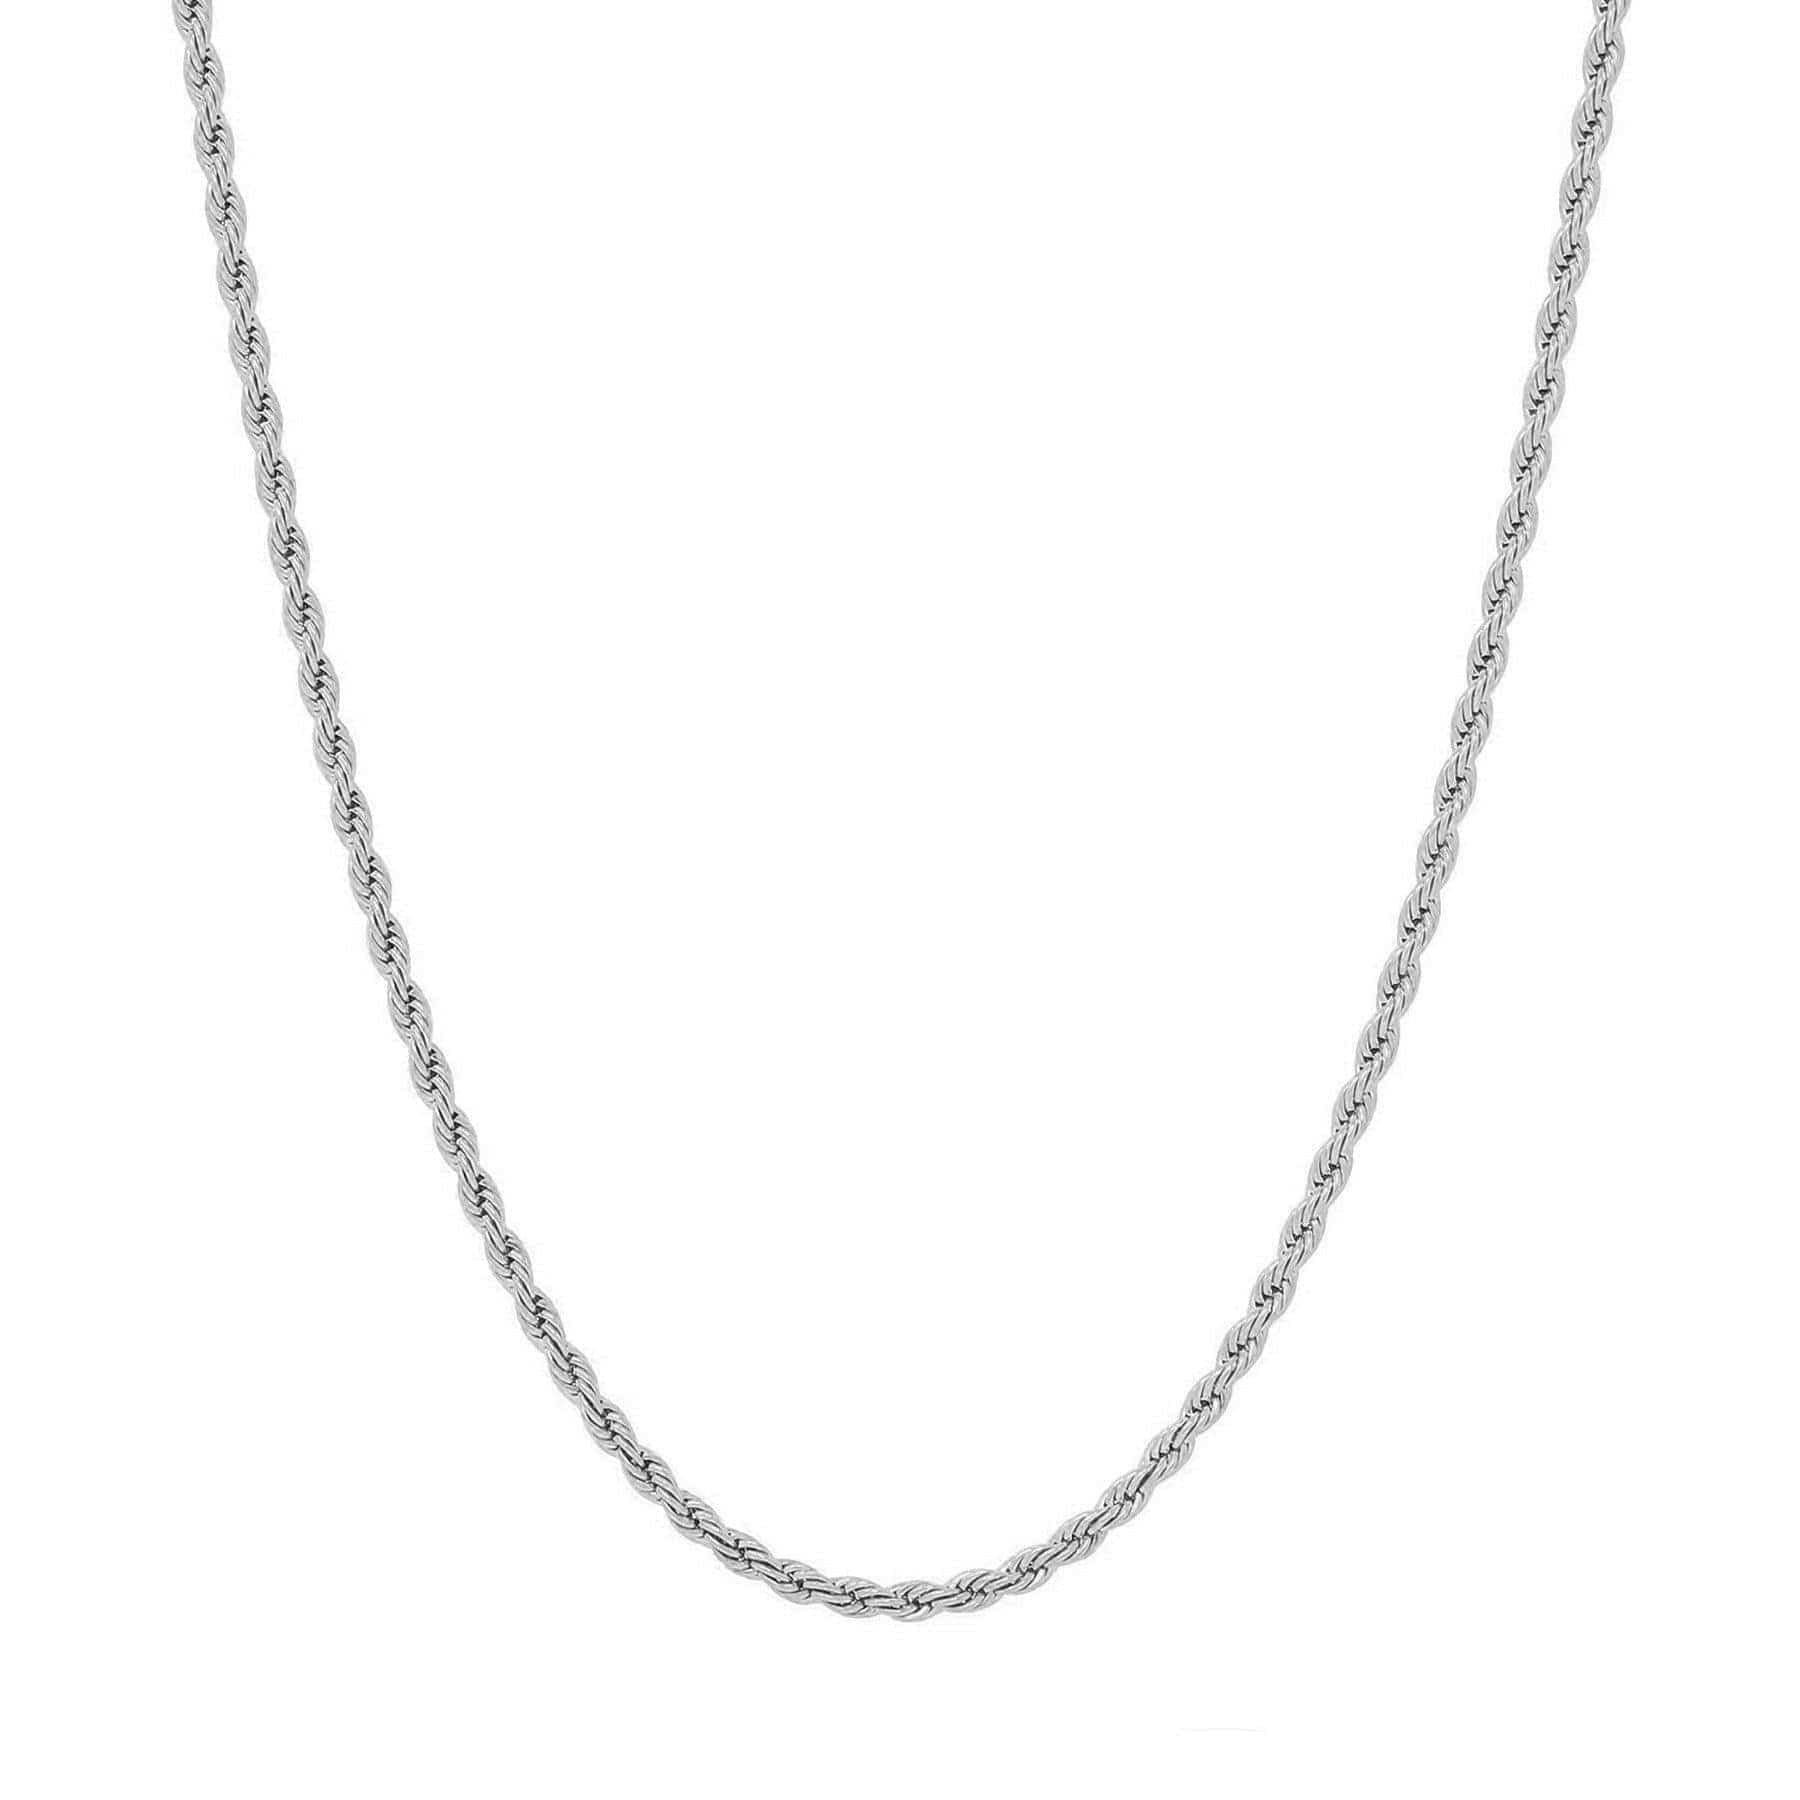 BohoMoon Stainless Steel Beverley Rope Choker / Necklace Silver / Necklace